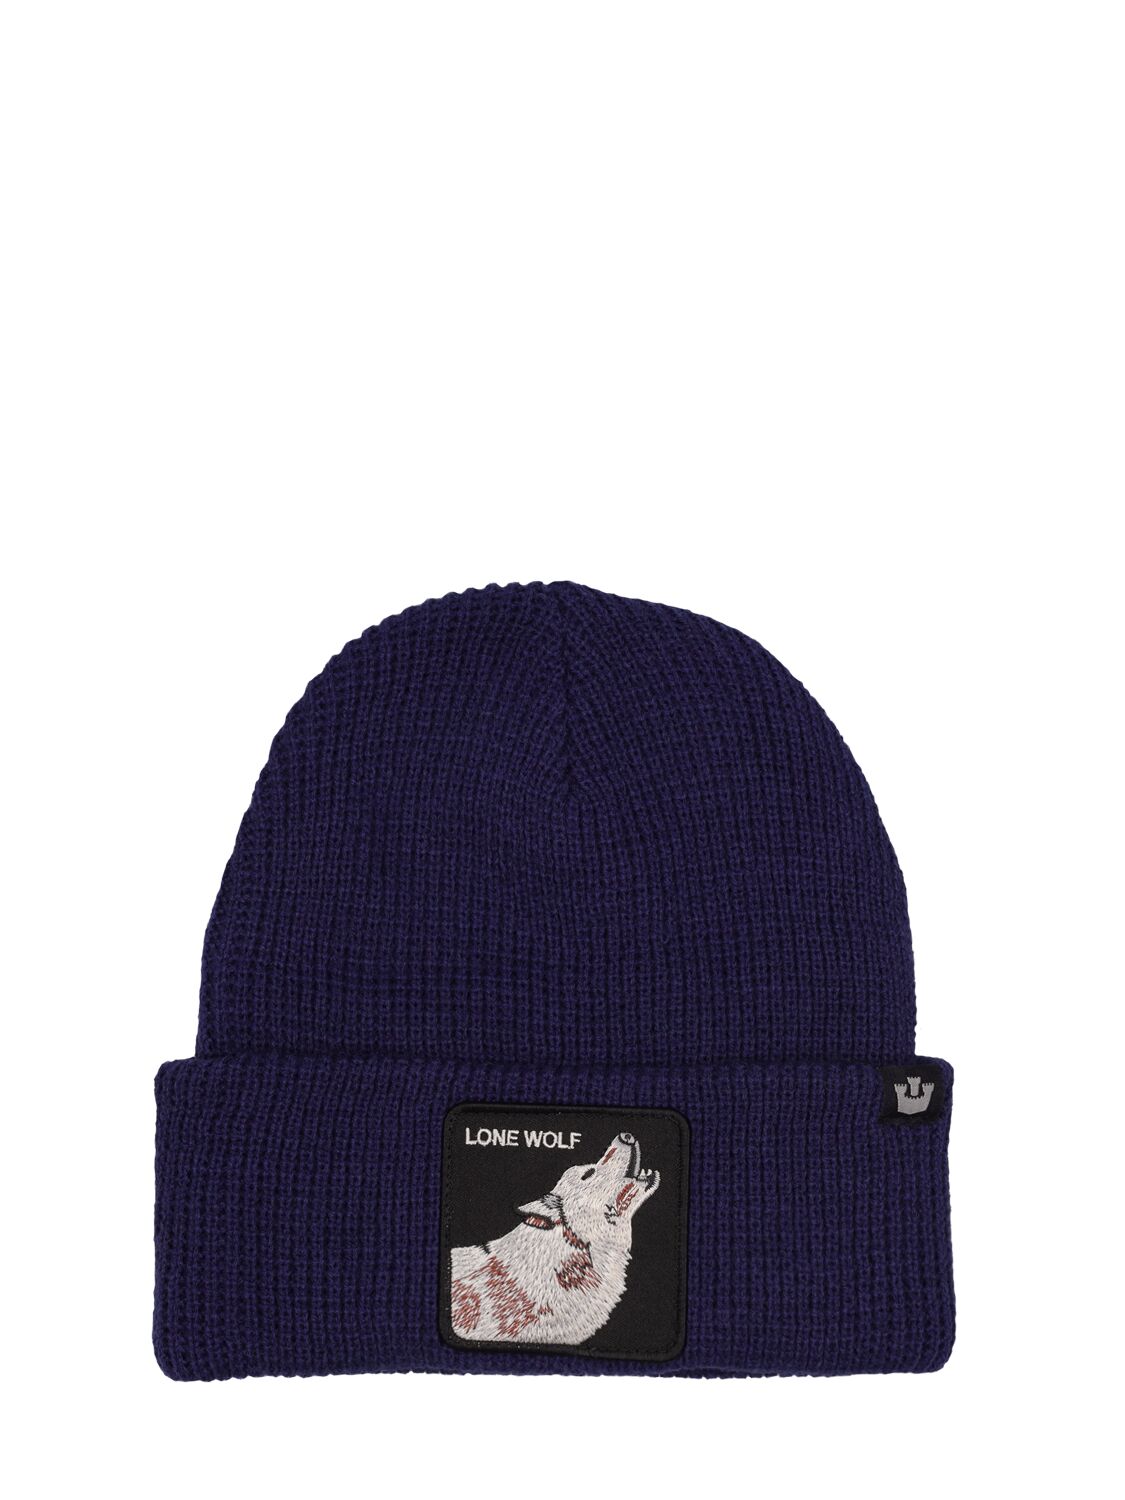 Image of Single Out Knit Beanie